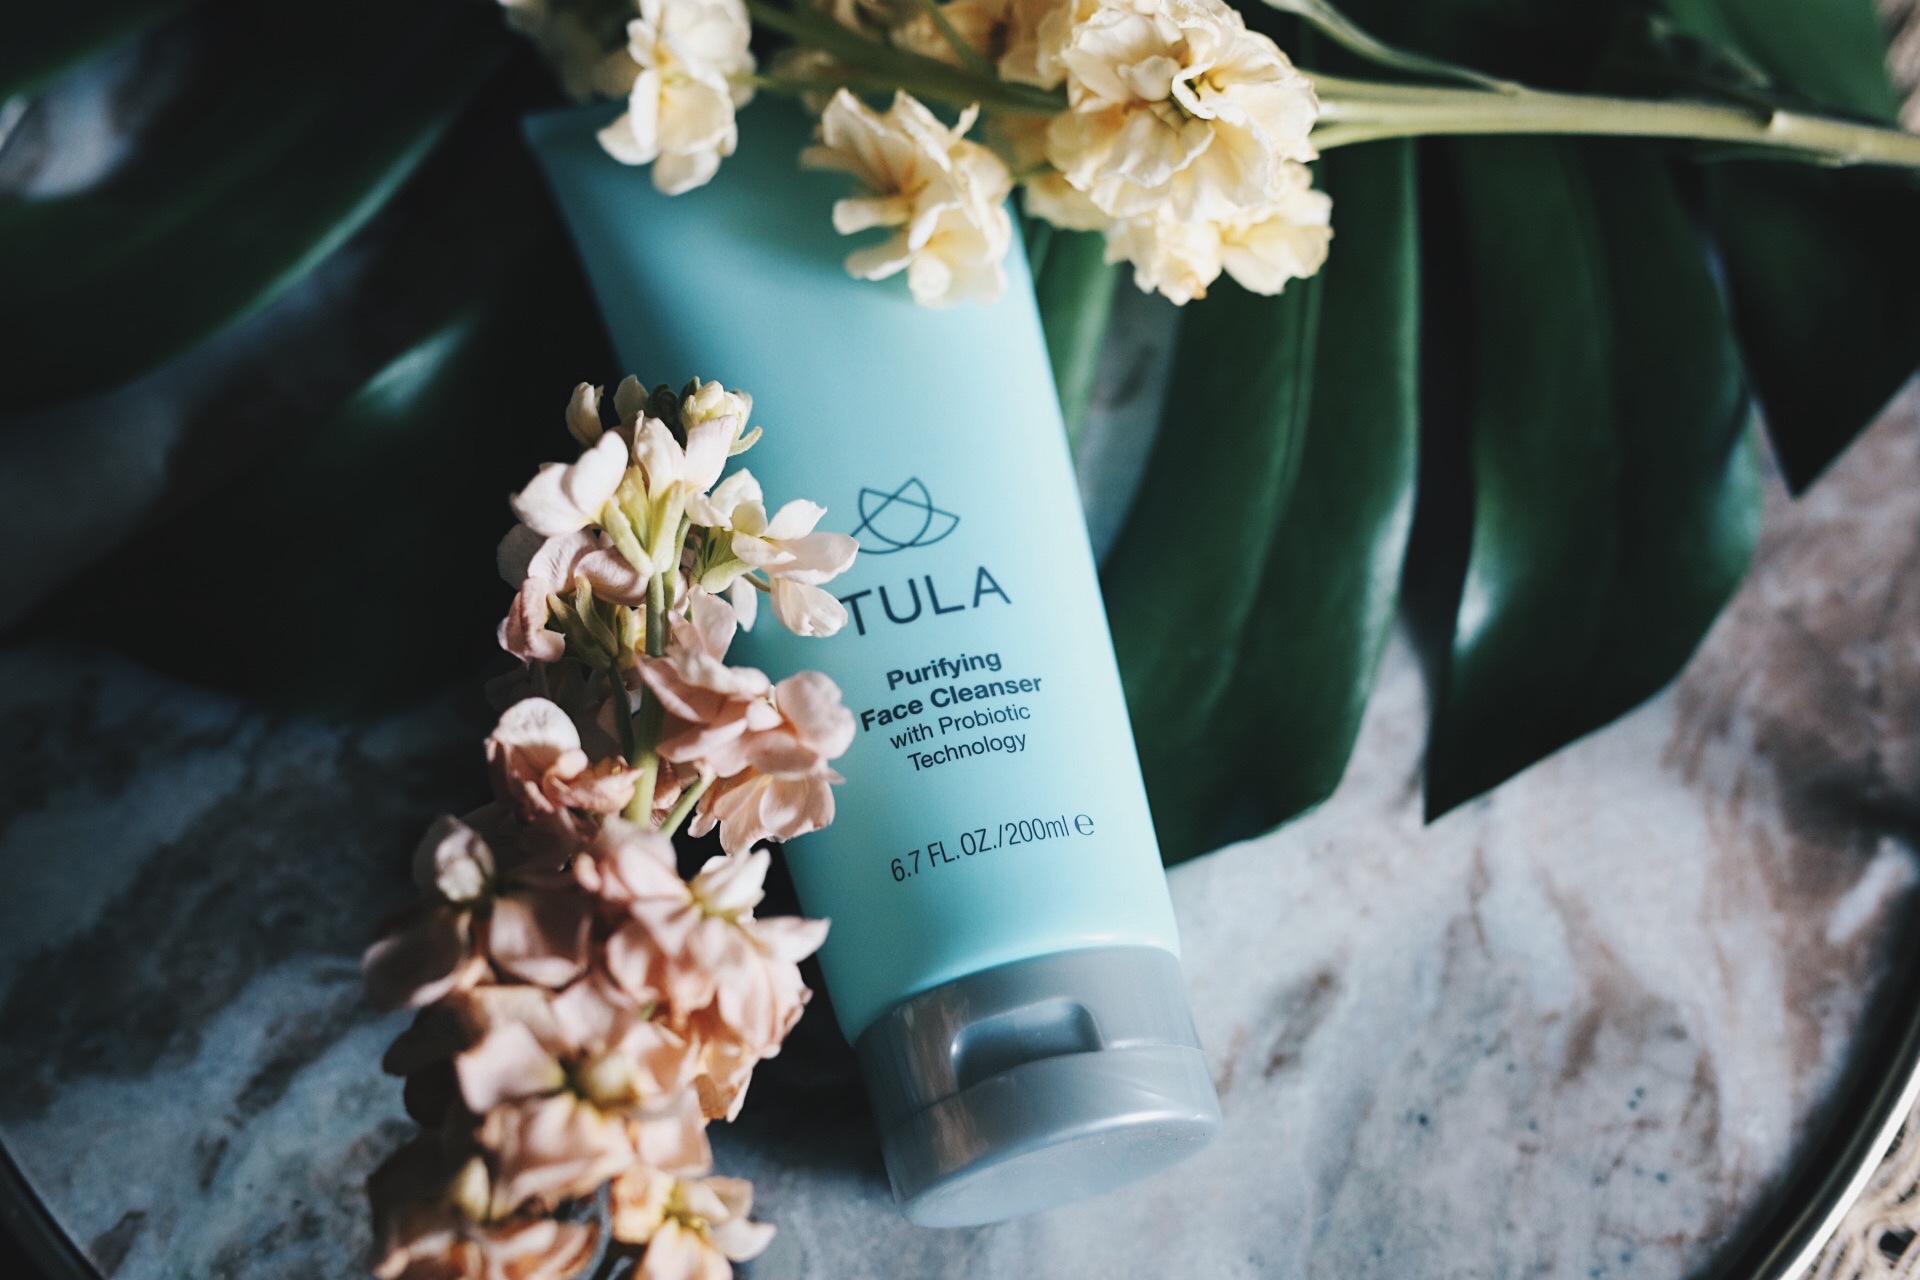 Austin blogger DTKAustin shares why healthy skincare is so important at any age with TULA | best skincare products | skincare products for any age | skincare routines | how to use skincare products | TULA skincare review | TULA skincare products || Dressed to Kill